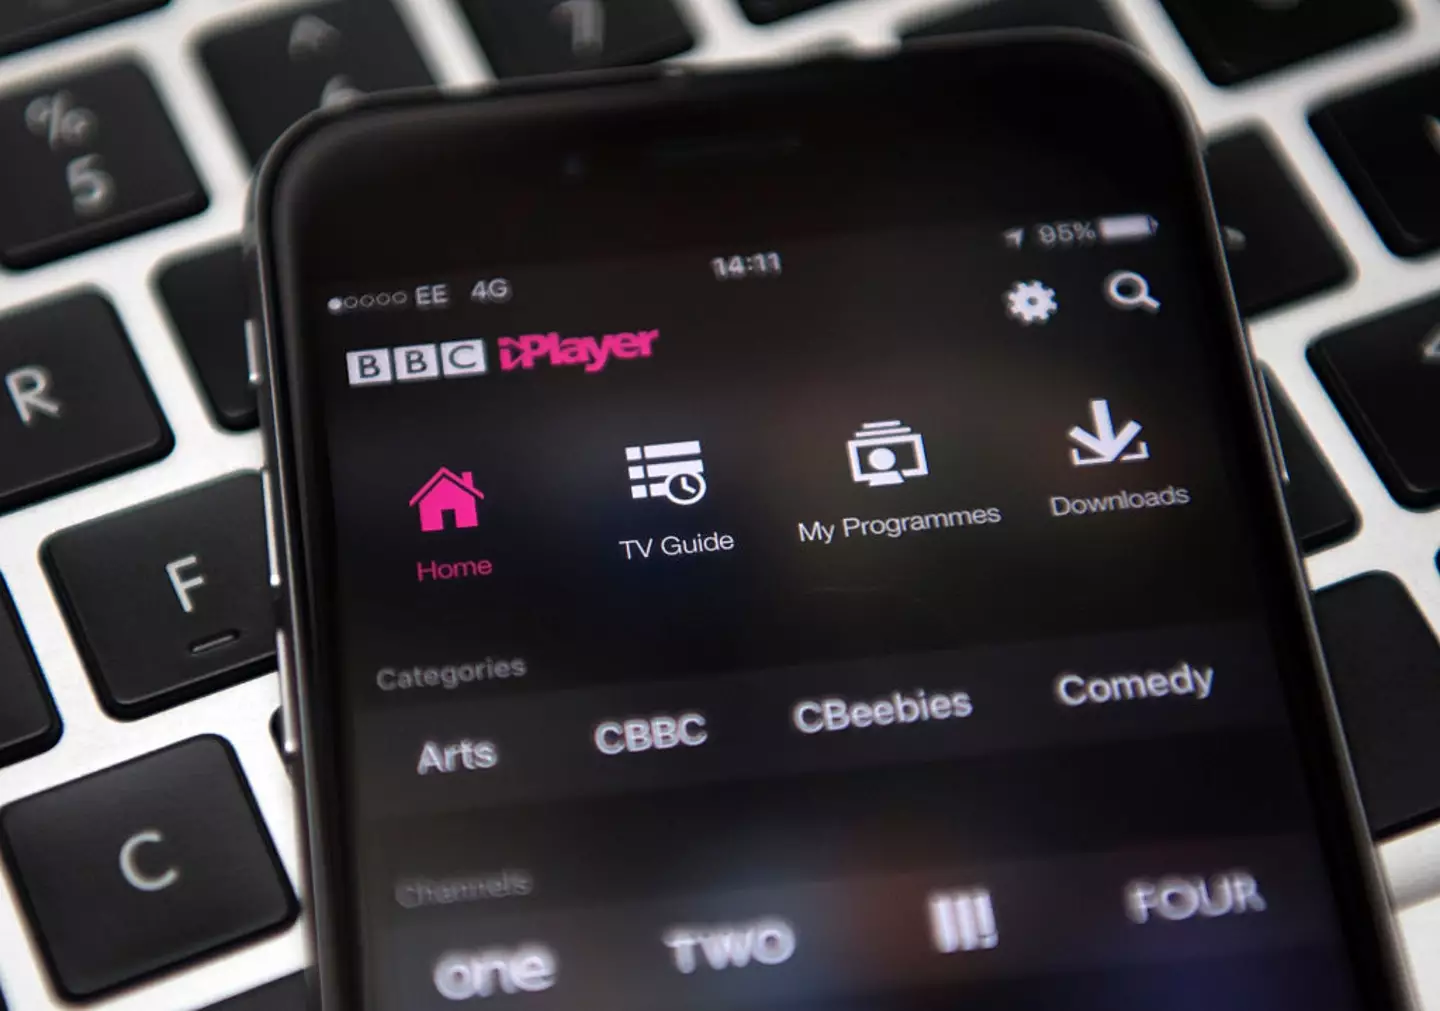 People watching BBC iPlayer on their laptops or desktop computers will no longer be able to download programmes to watch offline.